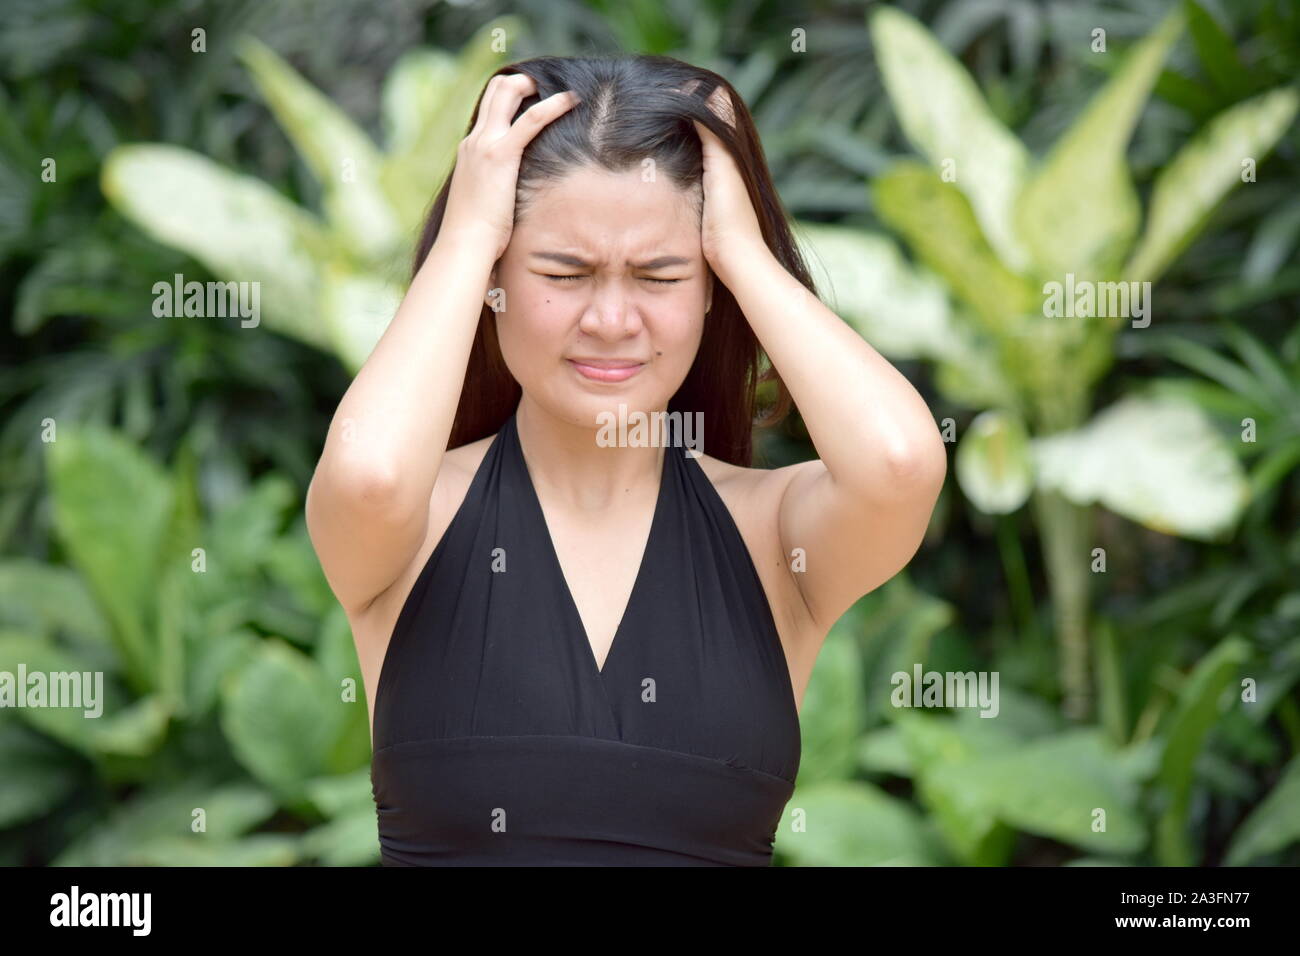 A Filipina Woman And Anxiety Stock Photo